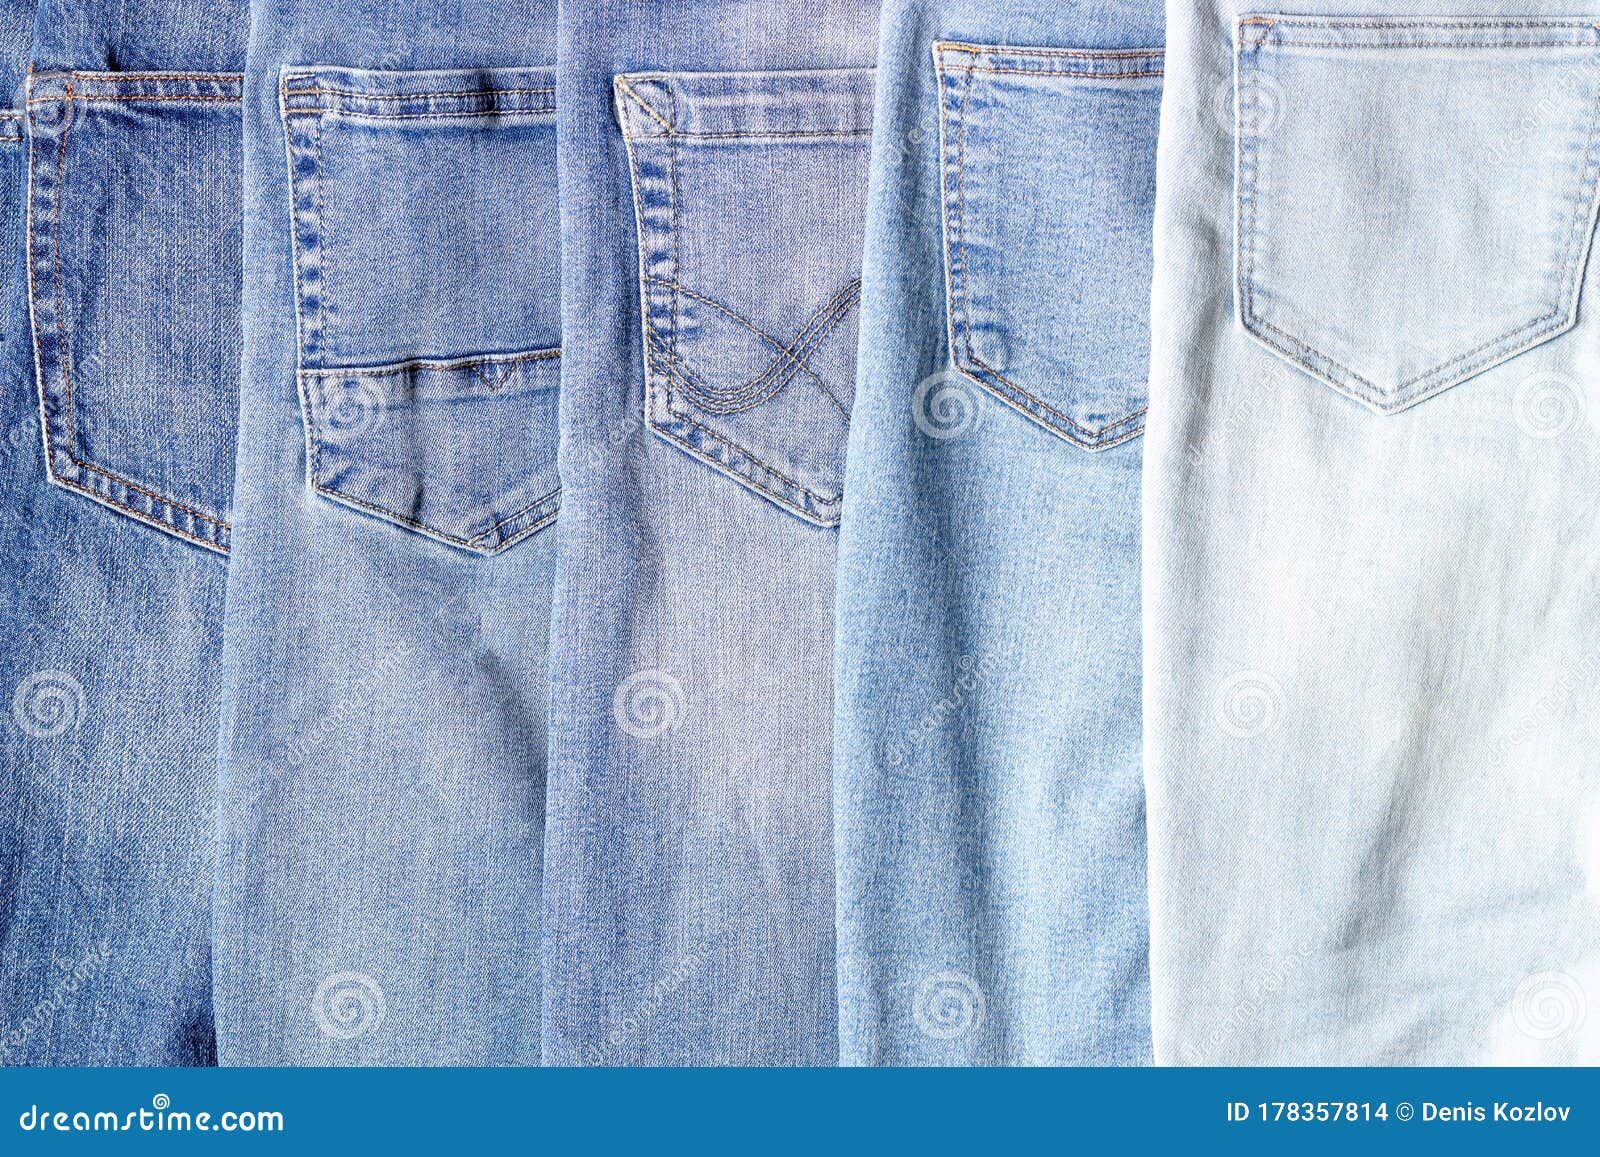 punch Industrialiseren rots Jeans Texture. Texture of Different Types and Colors of Jeans Stock Photo -  Image of garment, wear: 178357814